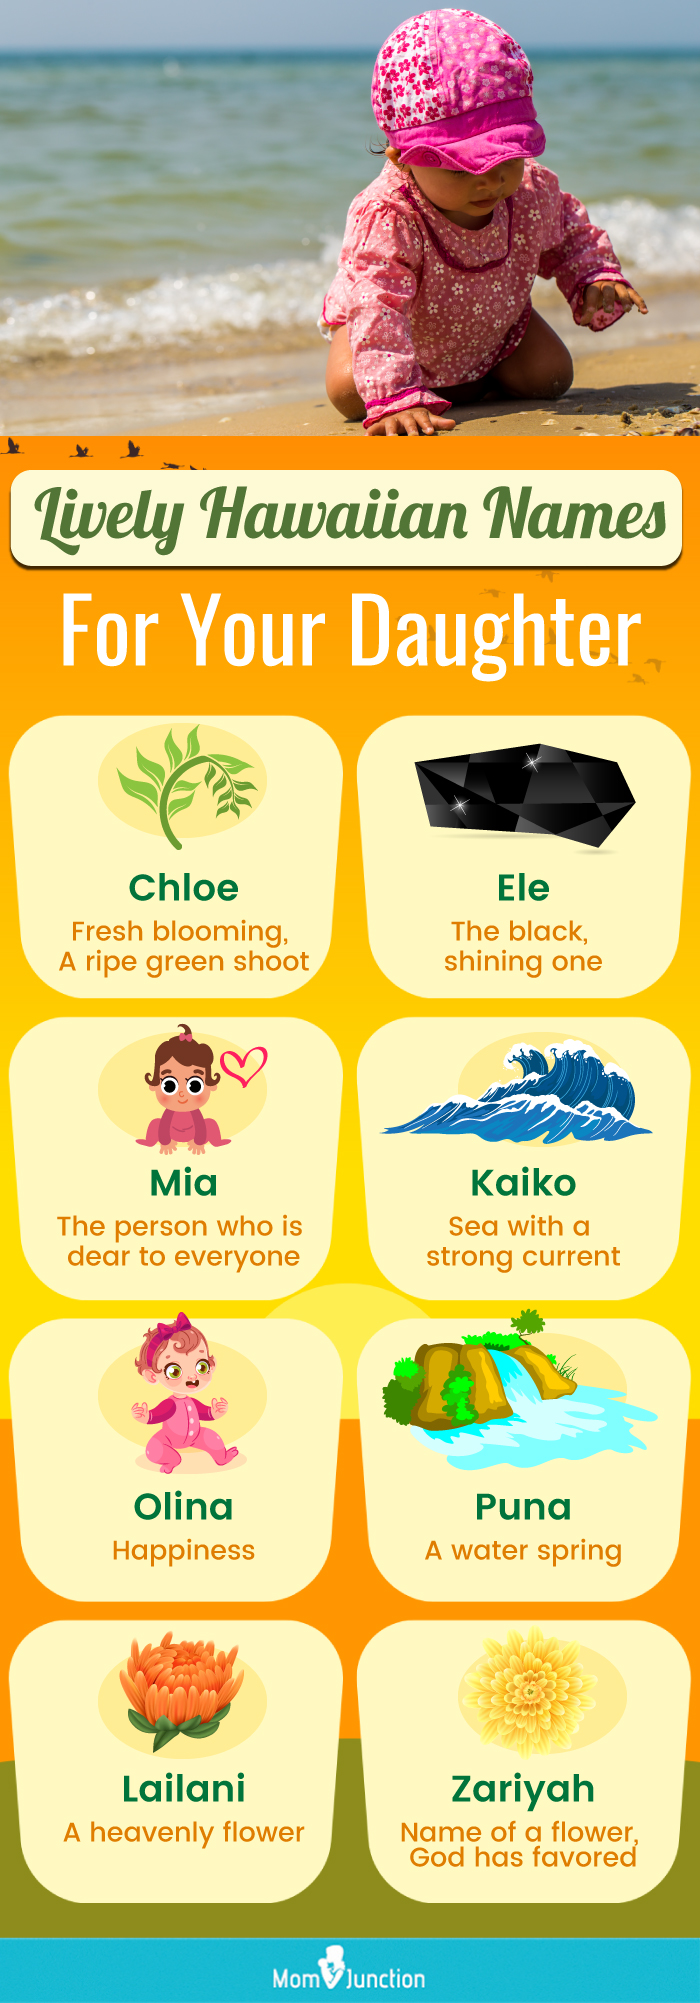 lively hawaiian names for your daughter (infographic)